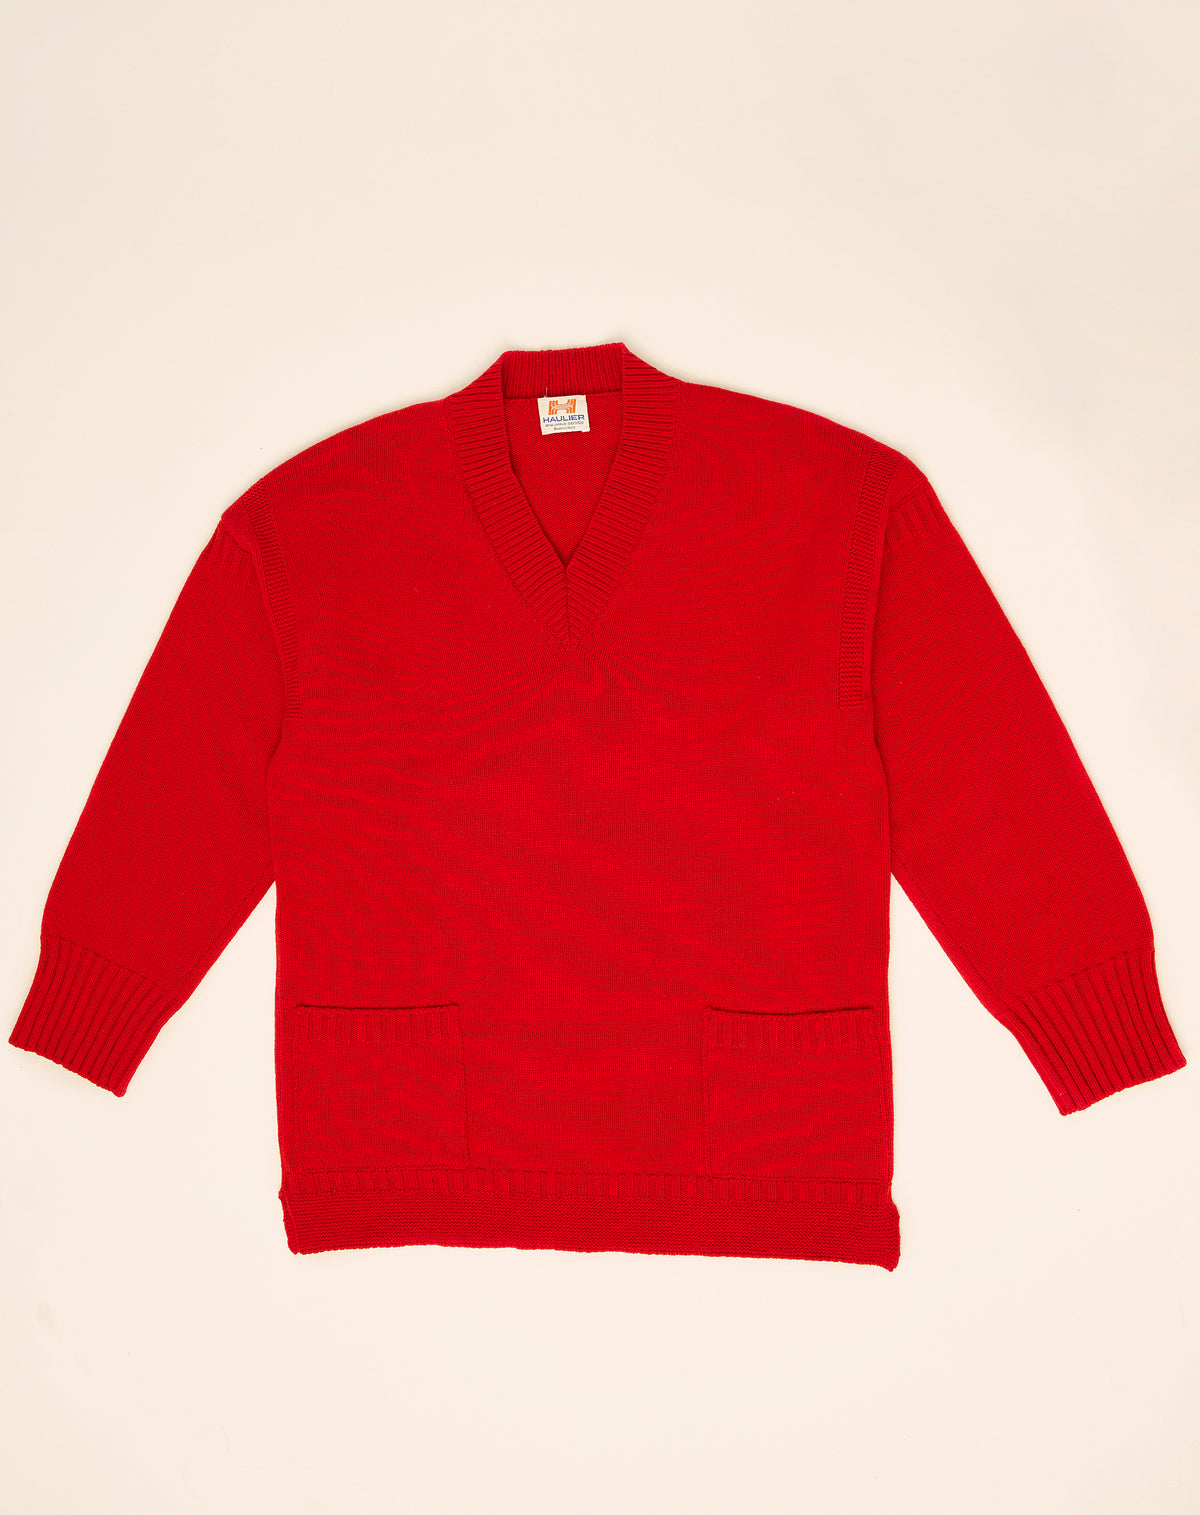 Guernsey Knit - Red